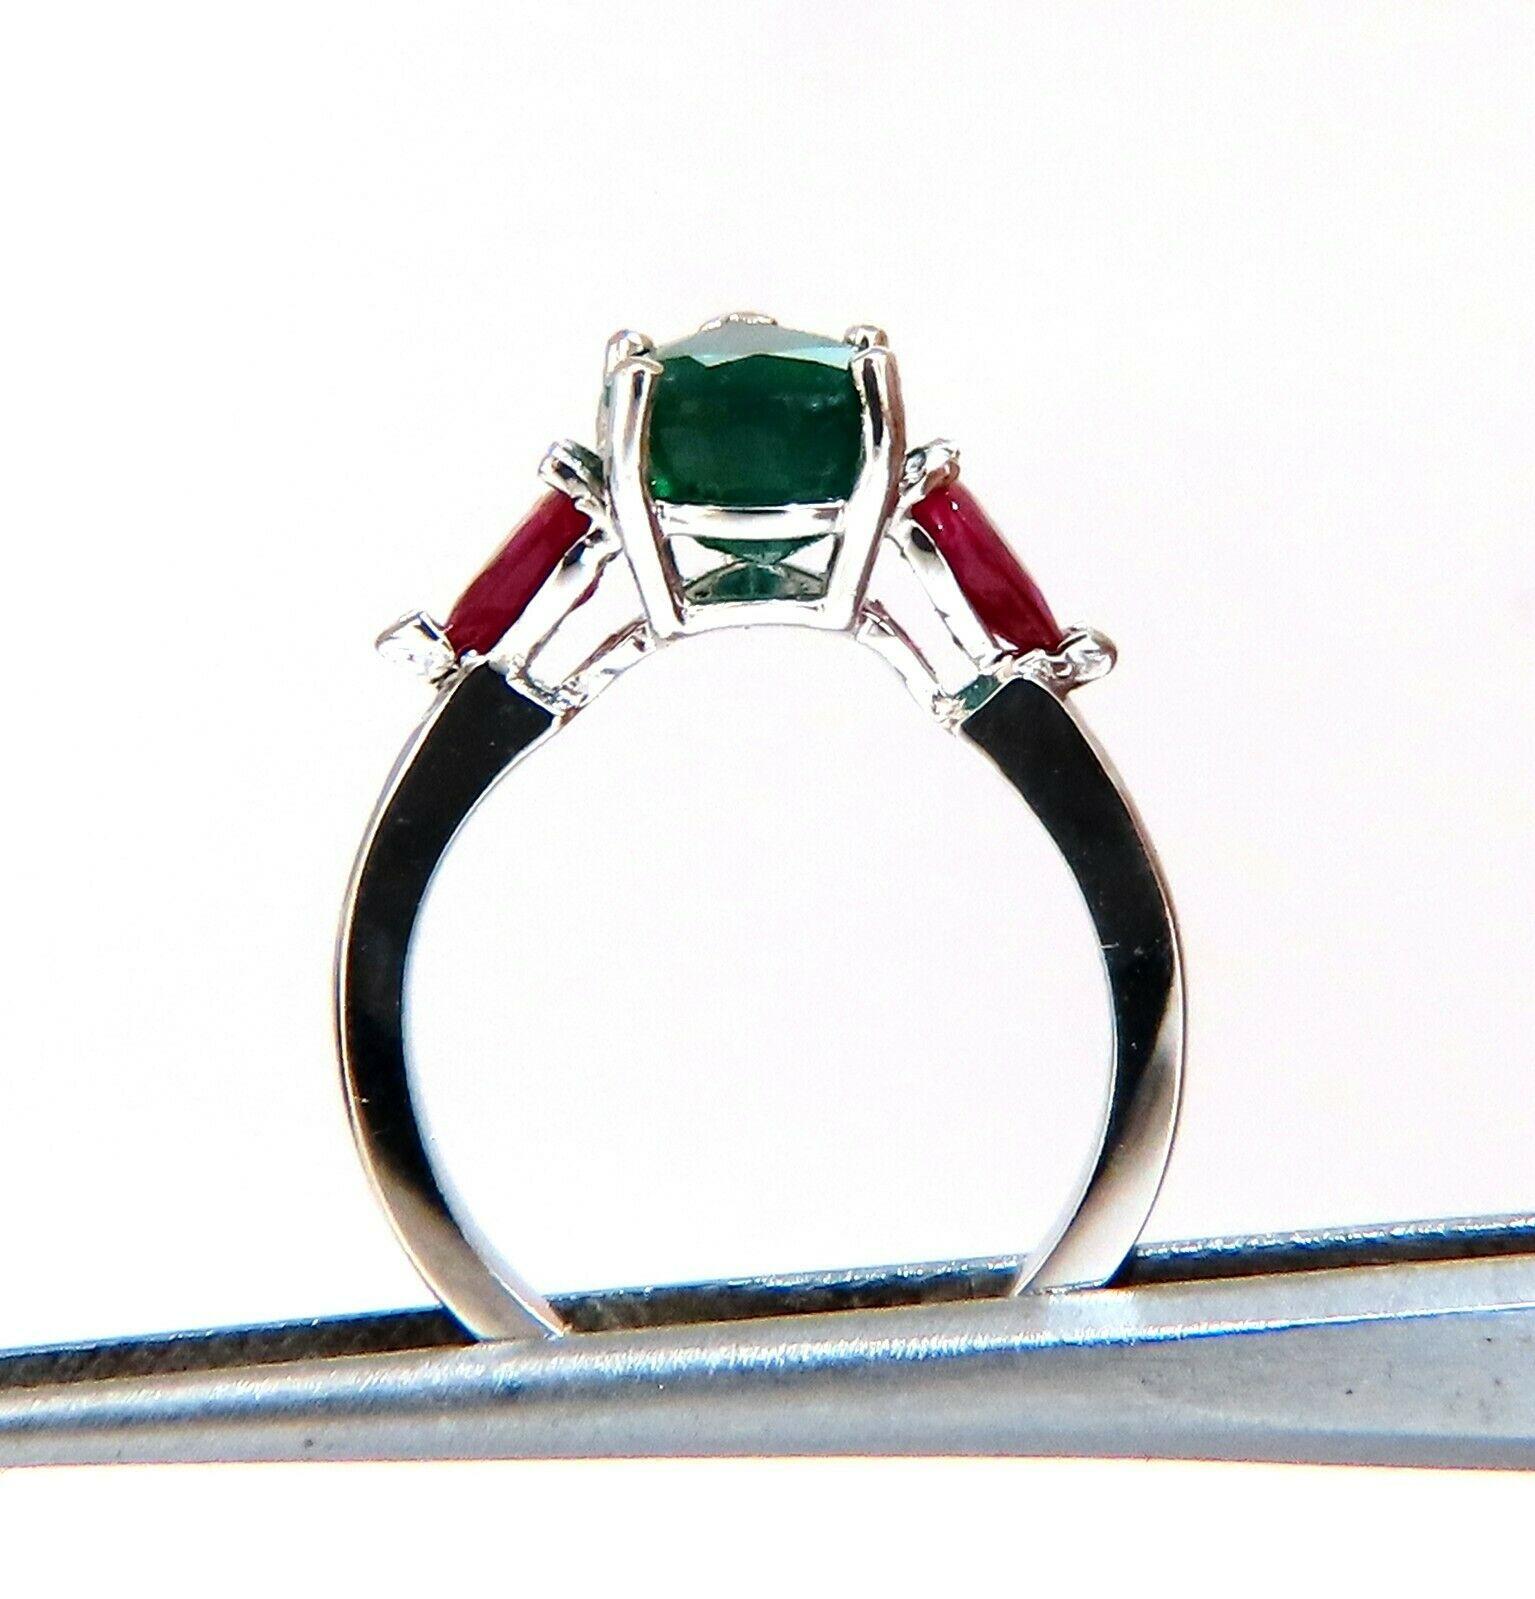 2.26 carat natural pair shaped emerald ring.

9x7 emerald, even green clean clarity and transparent.

.75 carat natural pear-shaped rubies on side.

Even Red Clean clarity and transparent

14 karat white gold 3.5 grams

Depth of ring 6.7 mm

Size 5